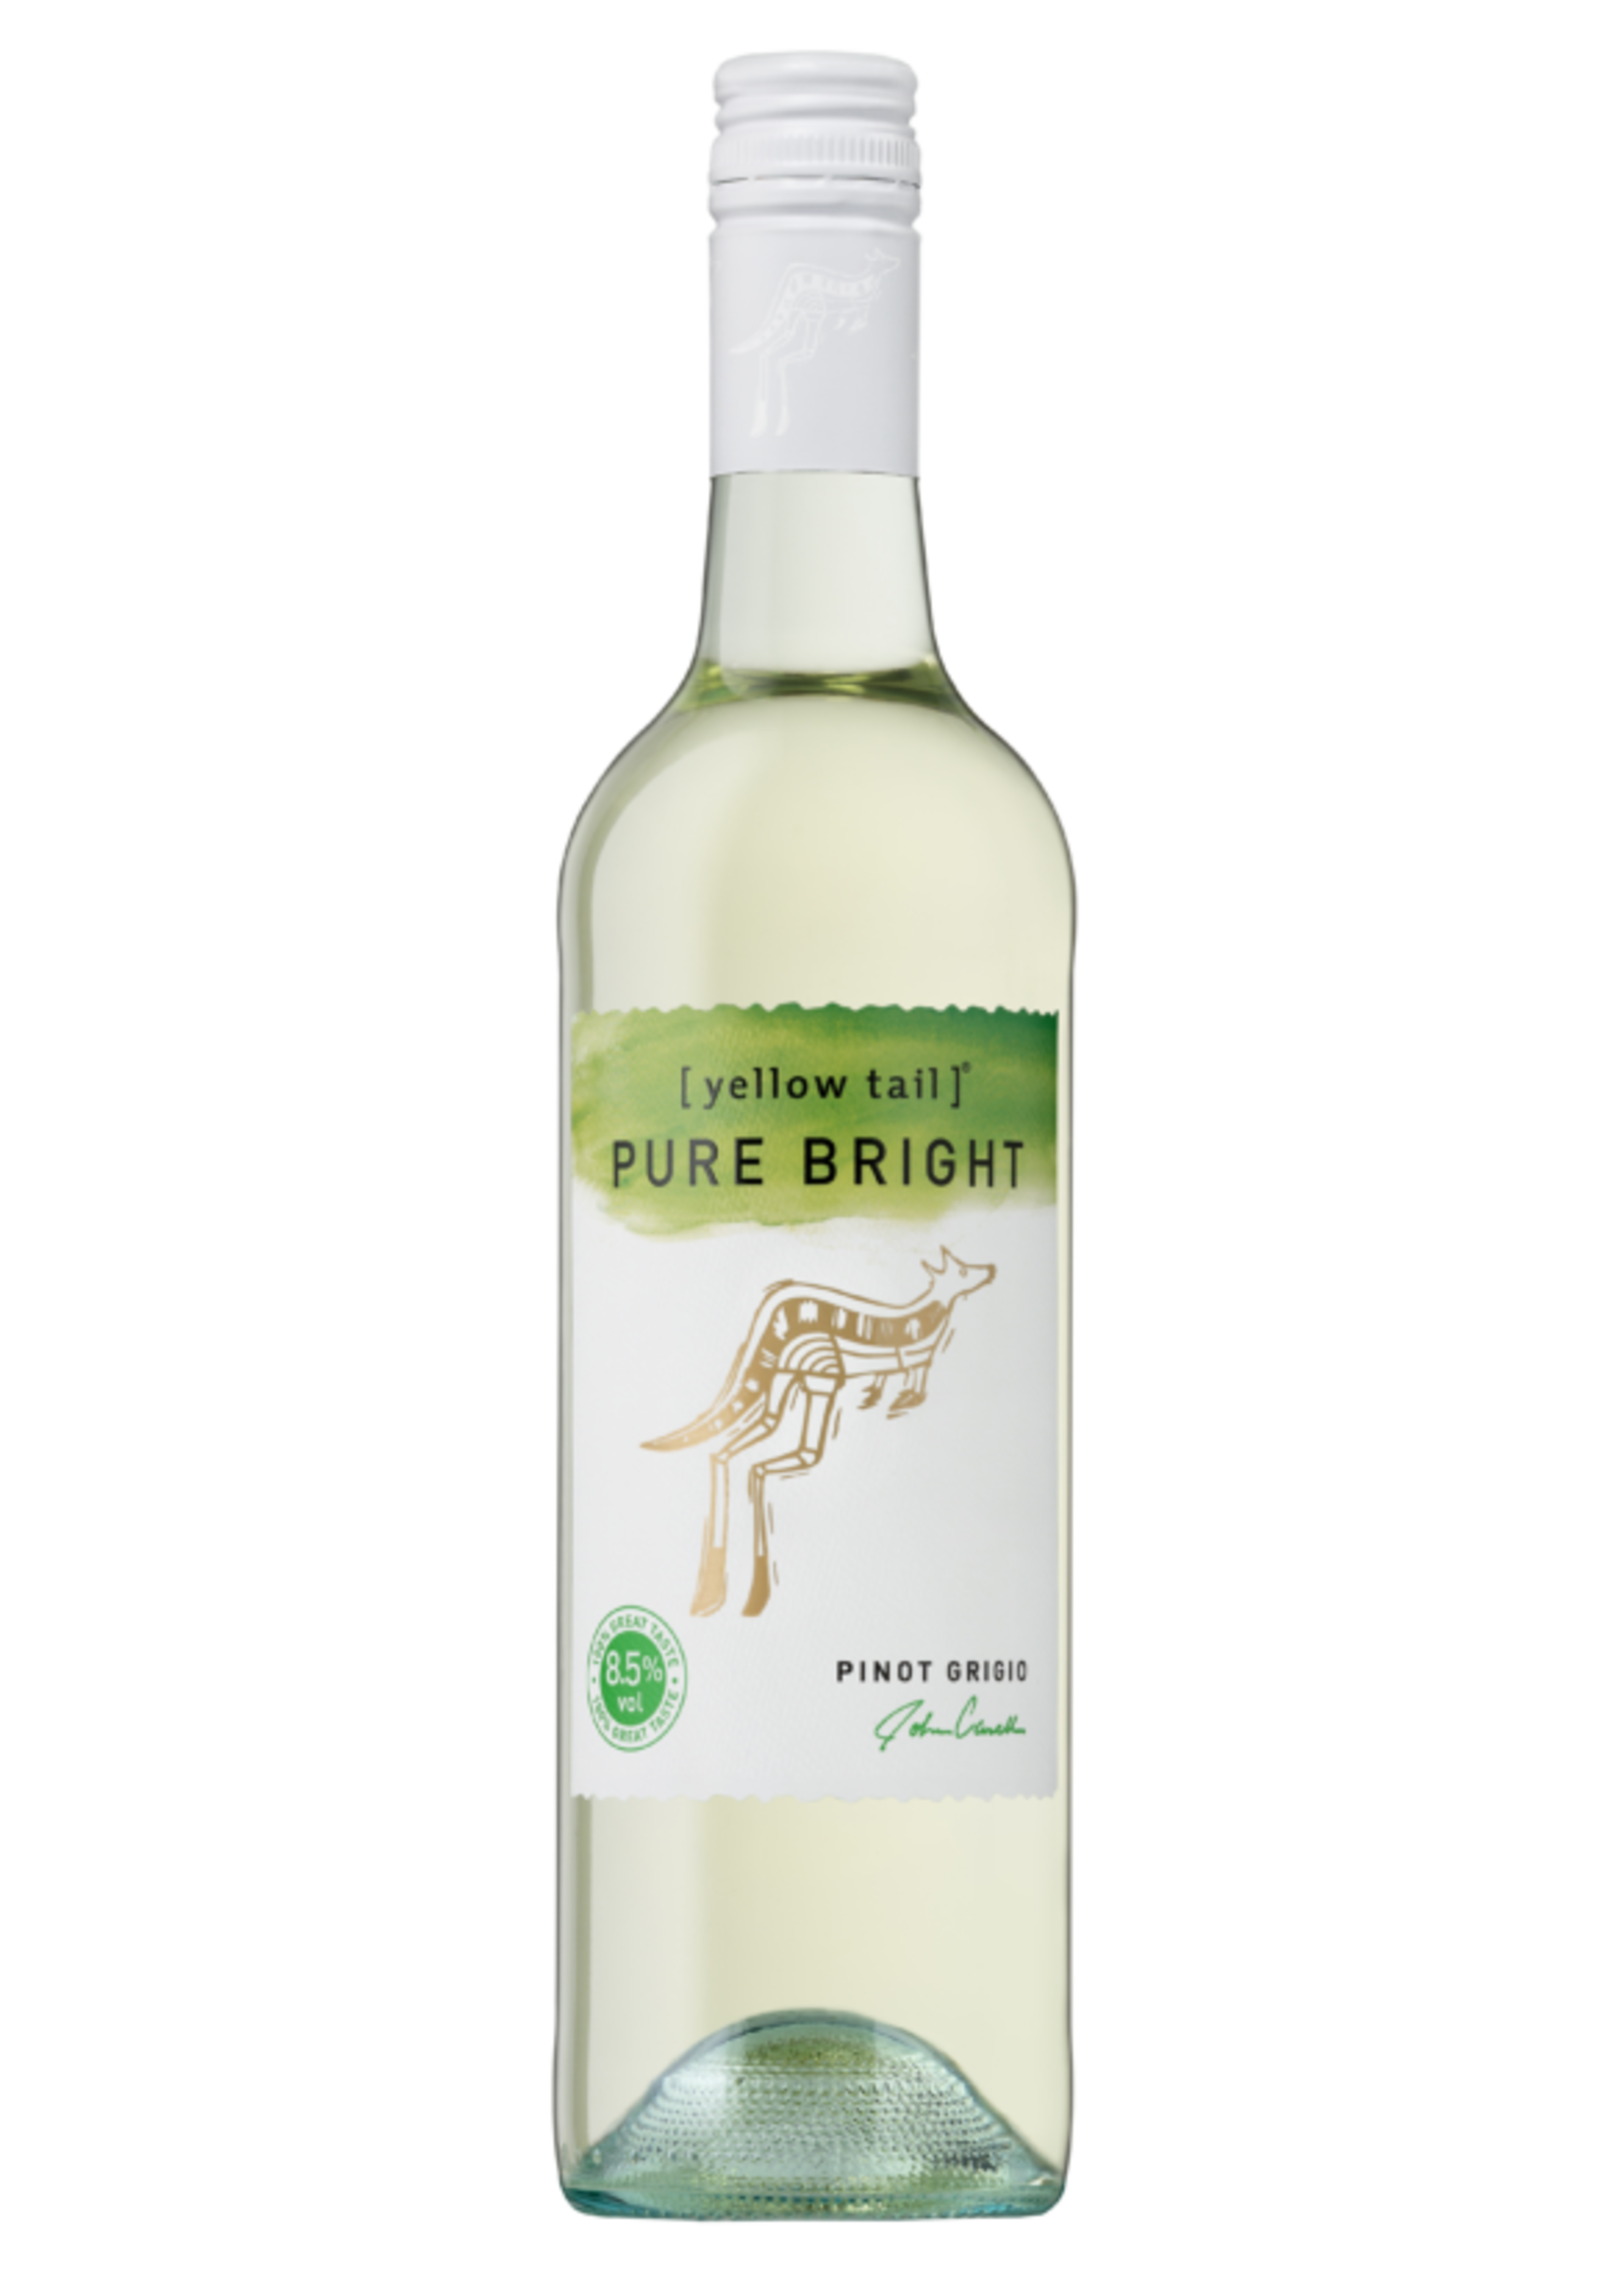 YELLOW TAIL YELLOW TAIL PURE BRIGHT PINOT GRIGIO	.750L